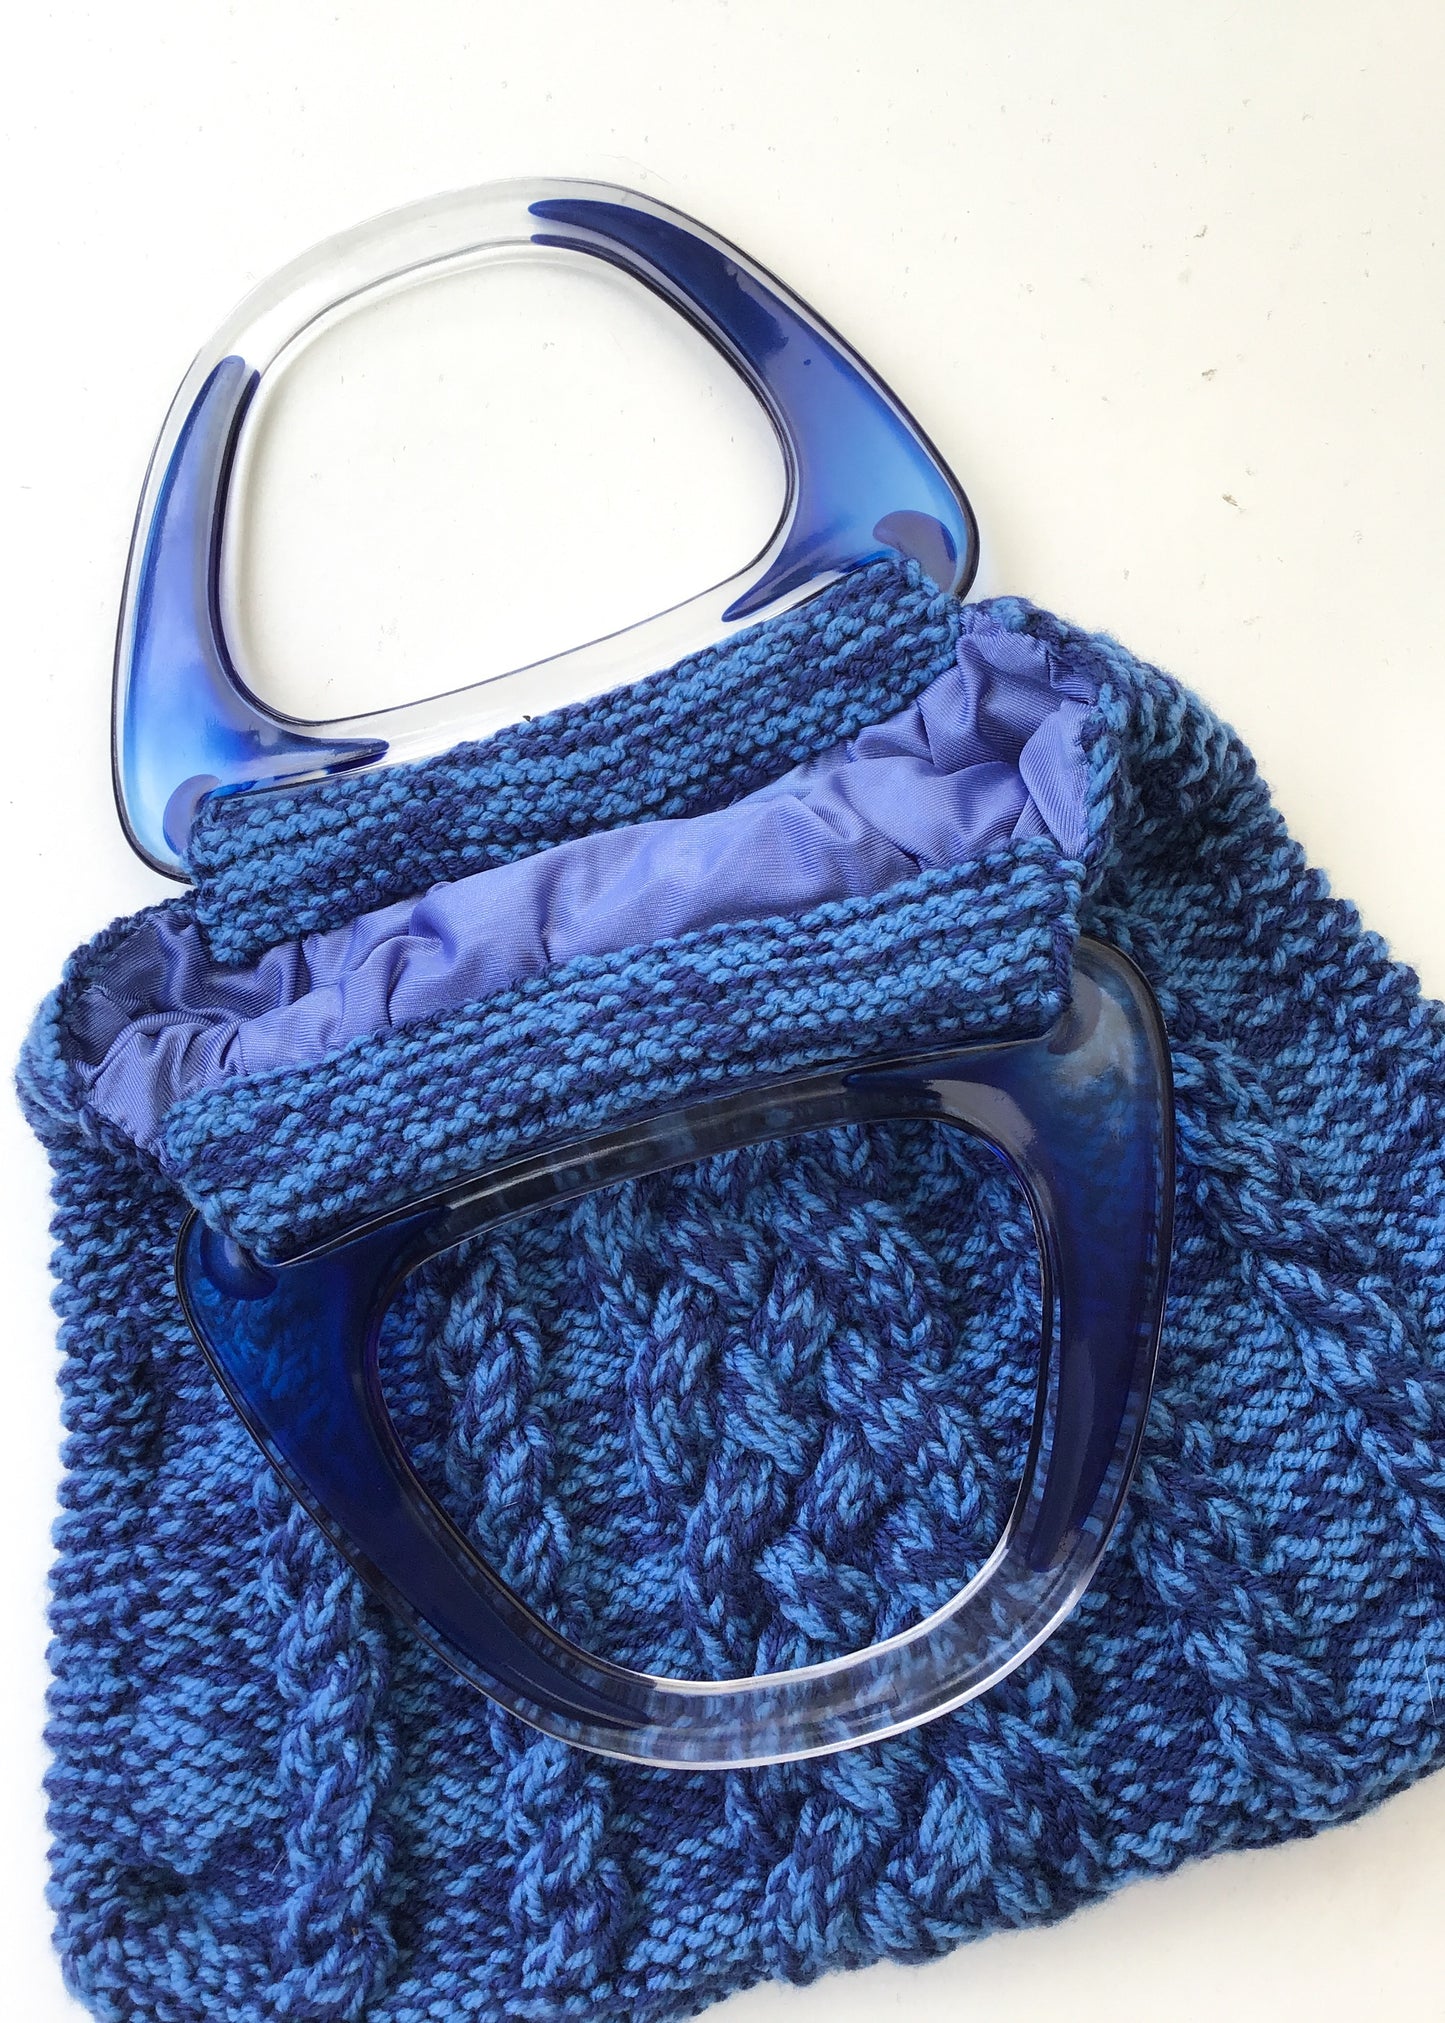 Vintage Blue Lucite Handle Knitting Bag 💙 Chunky Cable Knit